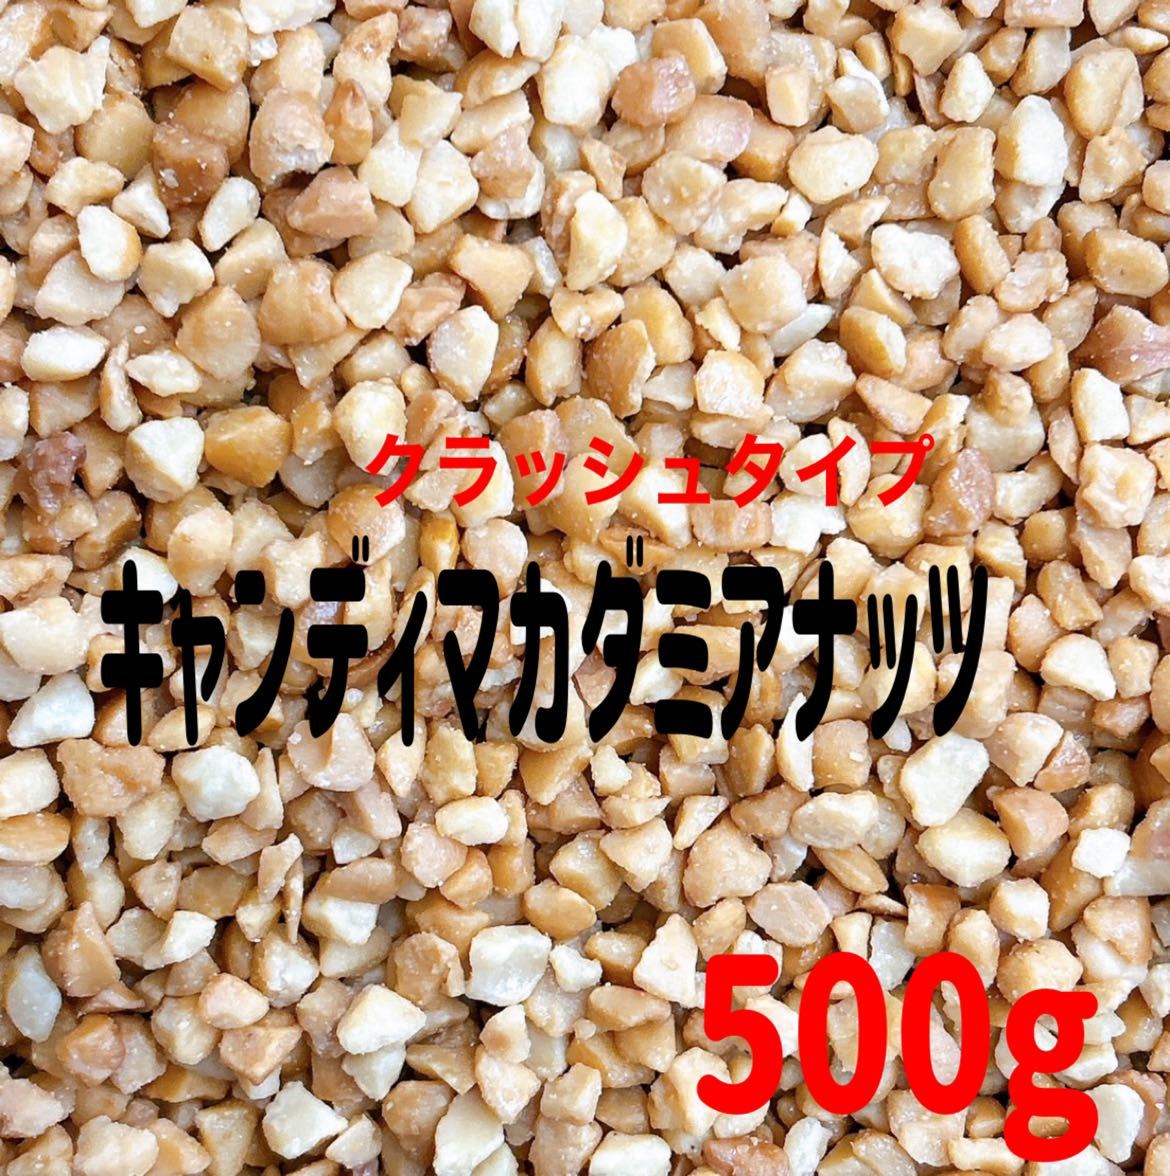 * sale * candy ng macadamia nuts 500g* inspection / topping mixed nuts .. paste ..